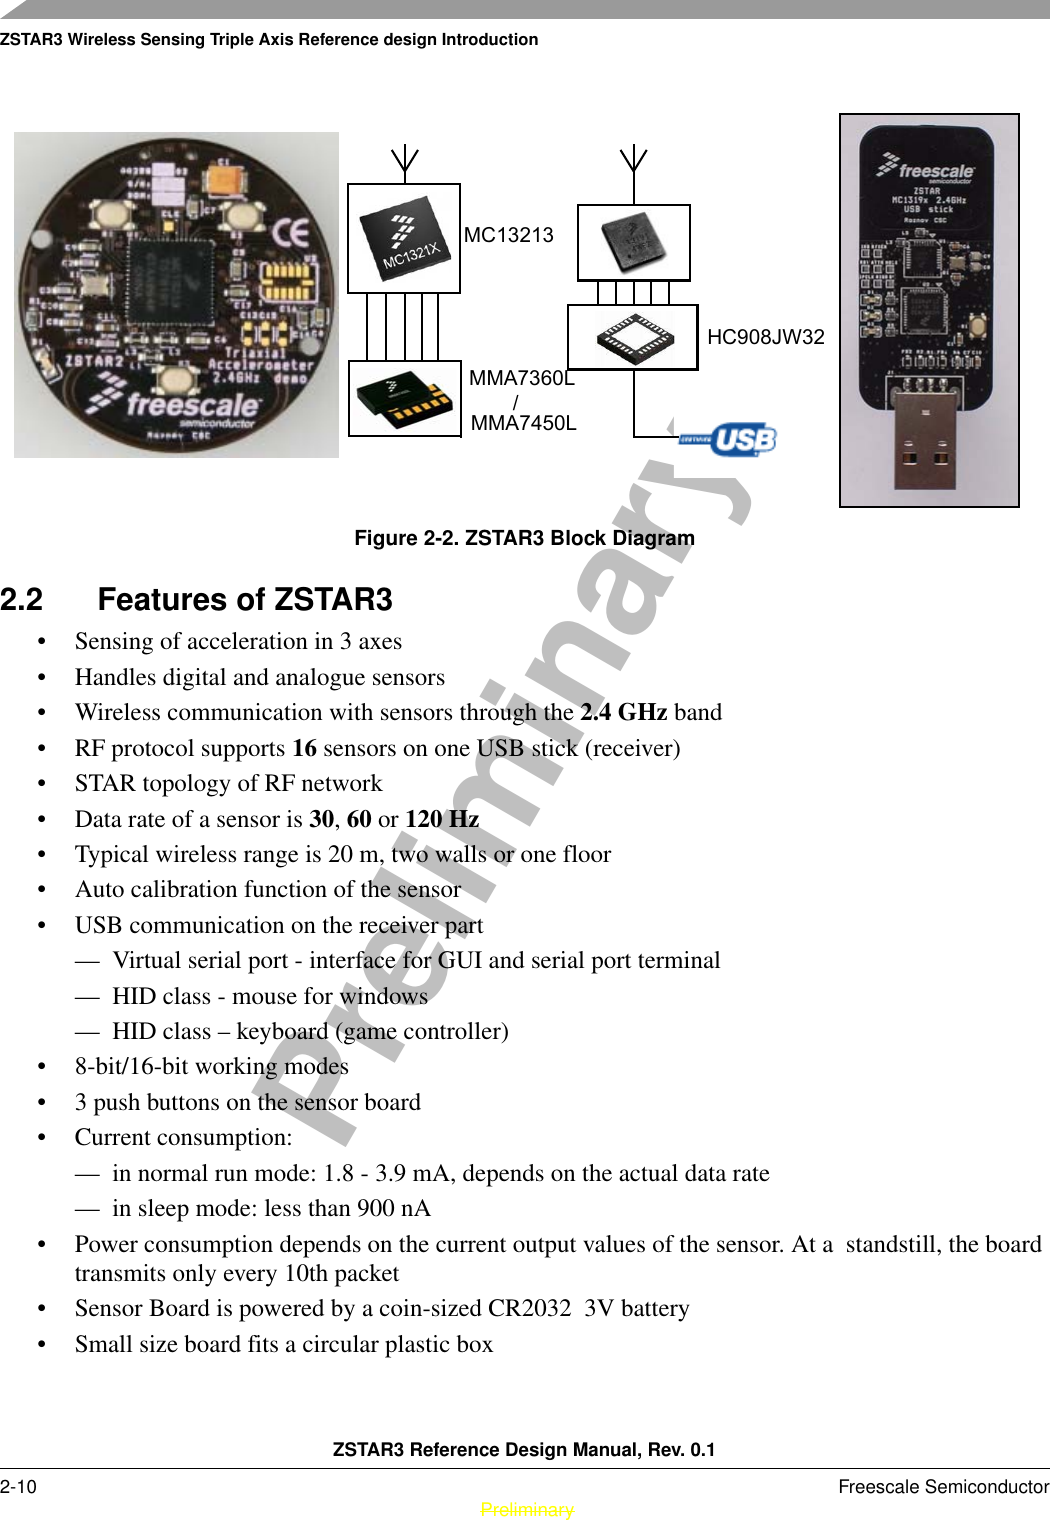 ZSTAR3 Wireless Sensing Triple Axis Reference design IntroductionZSTAR3 Reference Design Manual, Rev. 0.12-10 Freescale Semiconductor PreliminaryPreliminaryFigure 2-2. ZSTAR3 Block Diagram2.2 Features of ZSTAR3• Sensing of acceleration in 3 axes• Handles digital and analogue sensors • Wireless communication with sensors through the 2.4 GHz band• RF protocol supports 16 sensors on one USB stick (receiver) • STAR topology of RF network• Data rate of a sensor is 30, 60 or 120 Hz• Typical wireless range is 20 m, two walls or one floor• Auto calibration function of the sensor• USB communication on the receiver part— Virtual serial port - interface for GUI and serial port terminal— HID class - mouse for windows— HID class – keyboard (game controller)• 8-bit/16-bit working modes• 3 push buttons on the sensor board• Current consumption:— in normal run mode: 1.8 - 3.9 mA, depends on the actual data rate— in sleep mode: less than 900 nA• Power consumption depends on the current output values of the sensor. At a  standstill, the board transmits only every 10th packet   • Sensor Board is powered by a coin-sized CR2032  3V battery• Small size board fits a circular plastic boxMMA7360L HC908JW32MMA7450L /MC13213